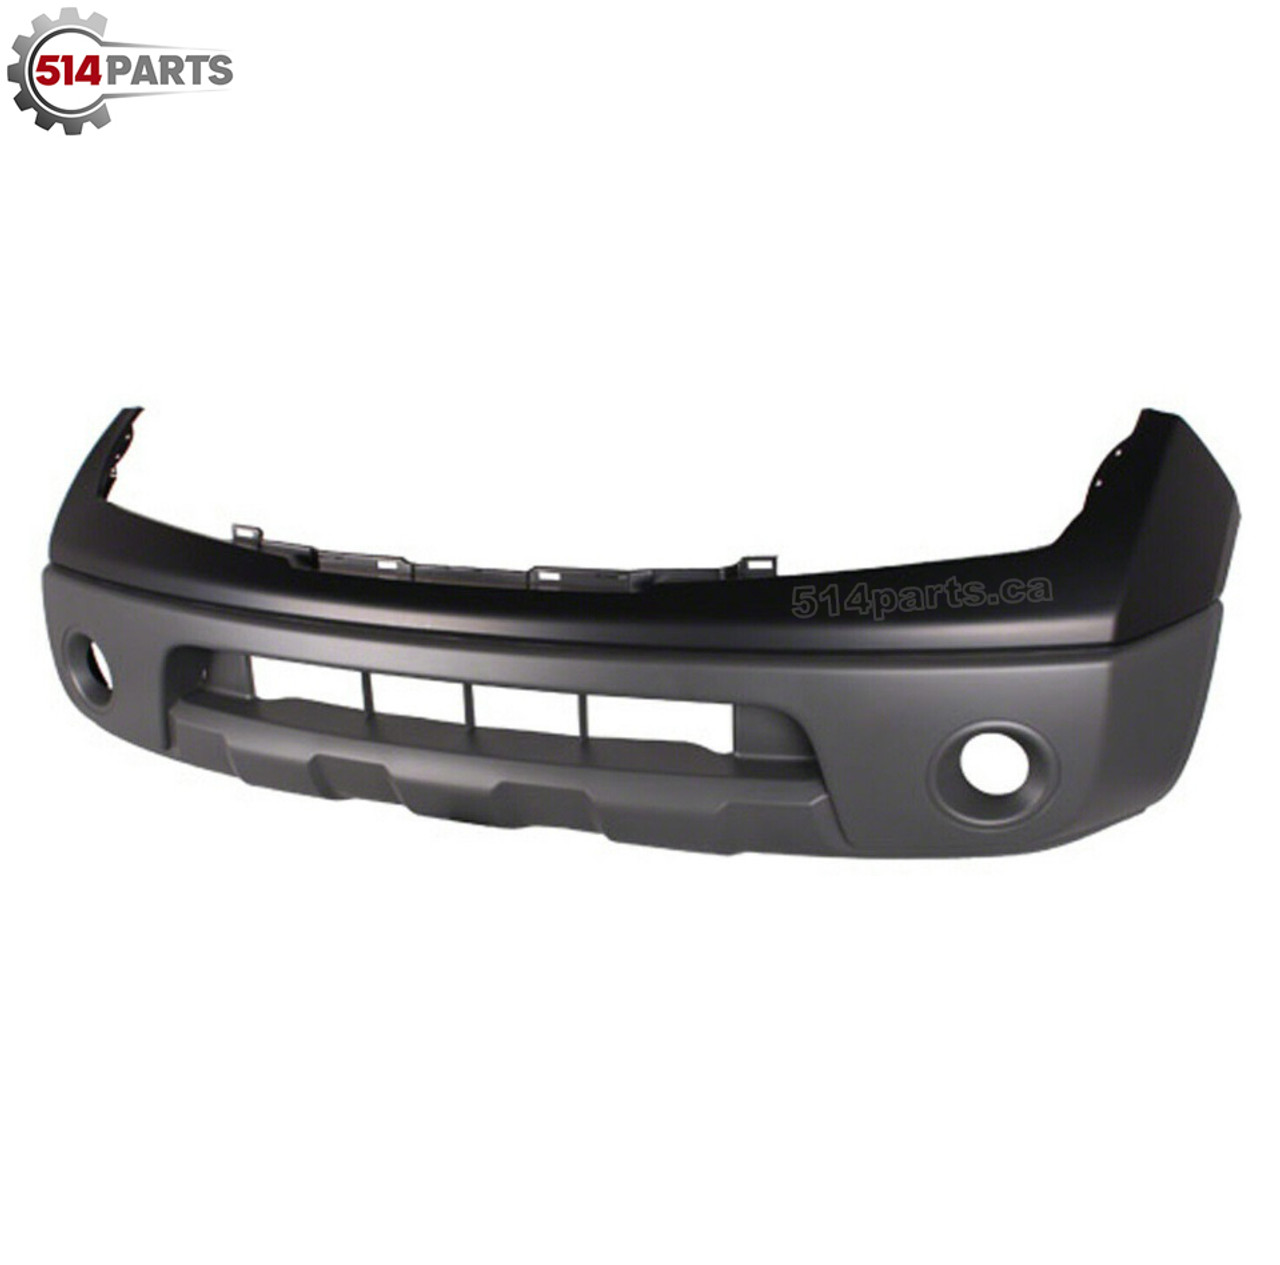 2005 - 2008 NISSAN FRONTIER FRONT BUMPER COVER PRIMED with TEXTURED CENTER AREA - PARE-CHOCS AVANT PRIME avec ZONE CENTRAL TEXTUREE